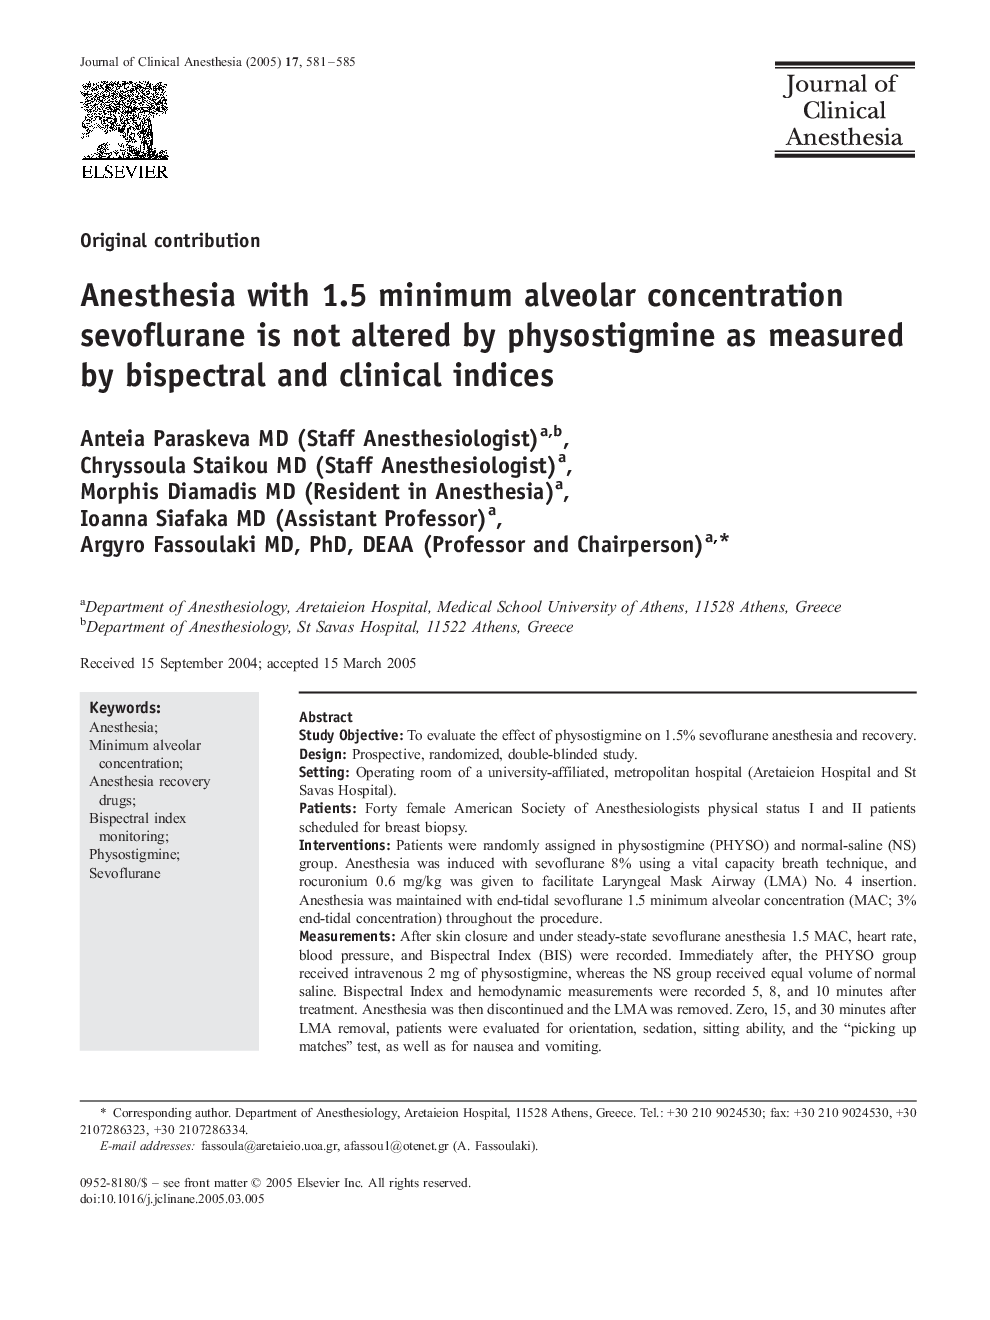 Anesthesia with 1.5 minimum alveolar concentration sevoflurane is not altered by physostigmine as measured by bispectral and clinical indices